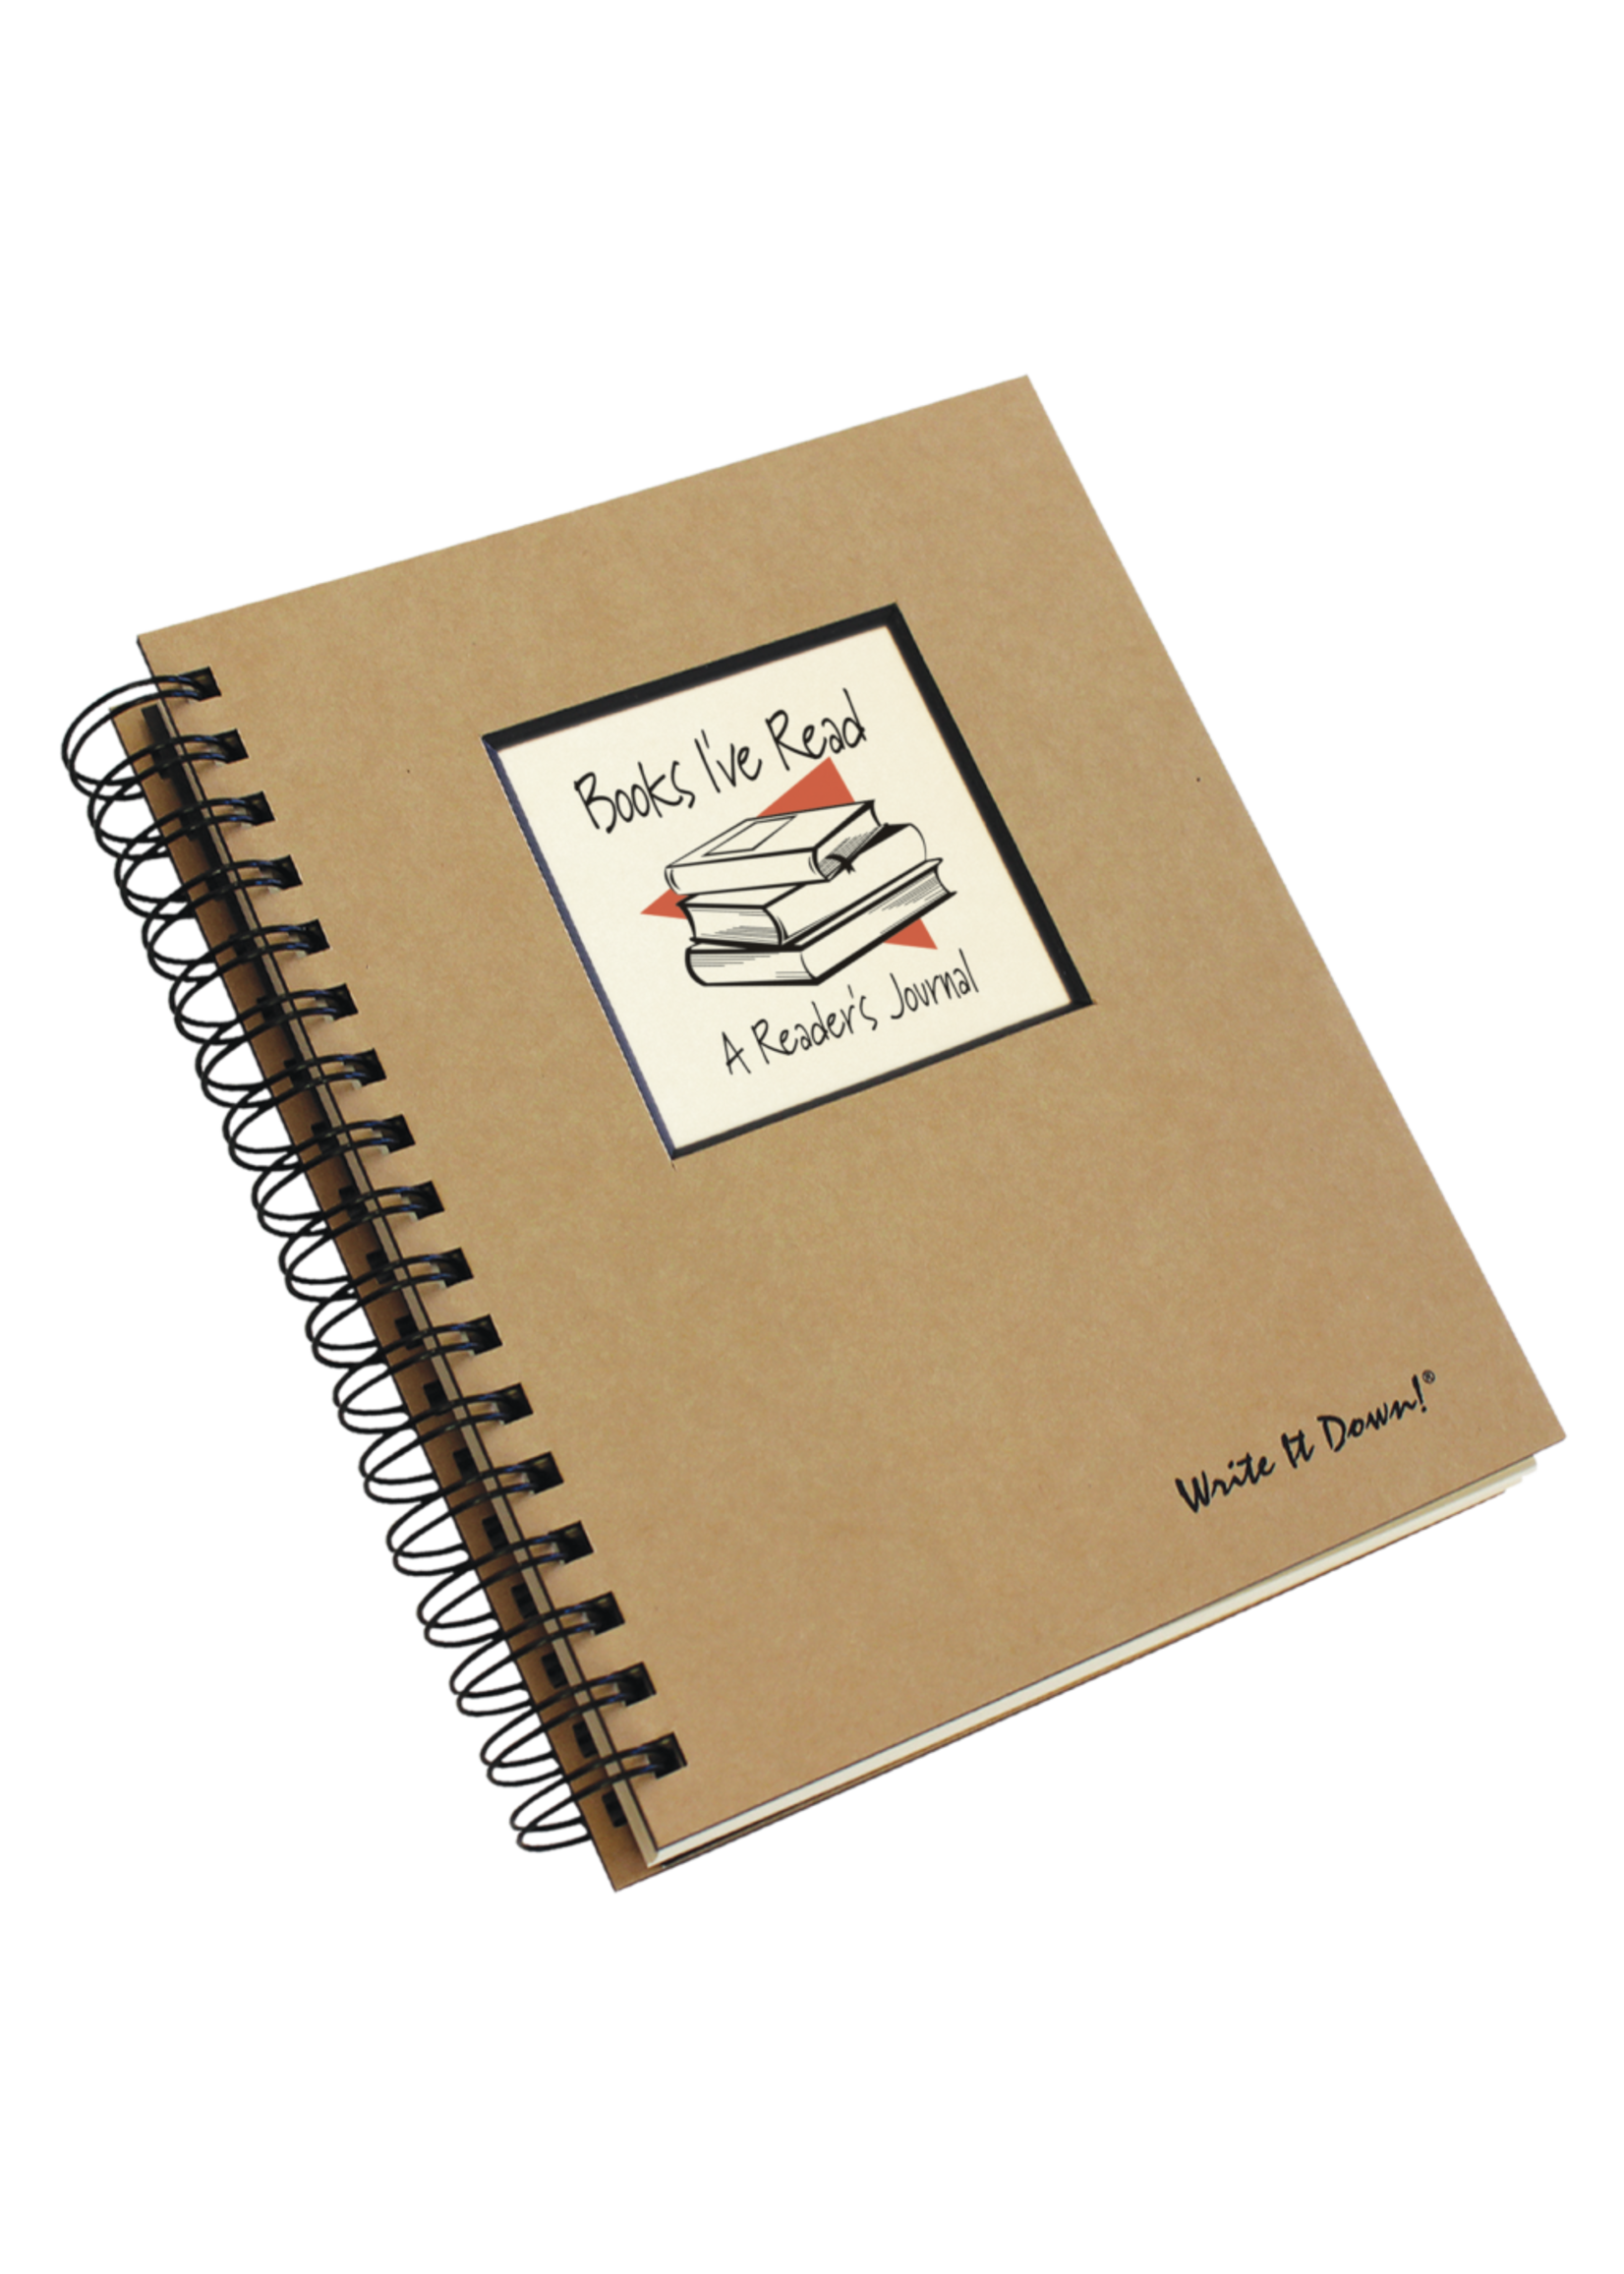 Journals Unlimited Books I've Read, A Readers Journal